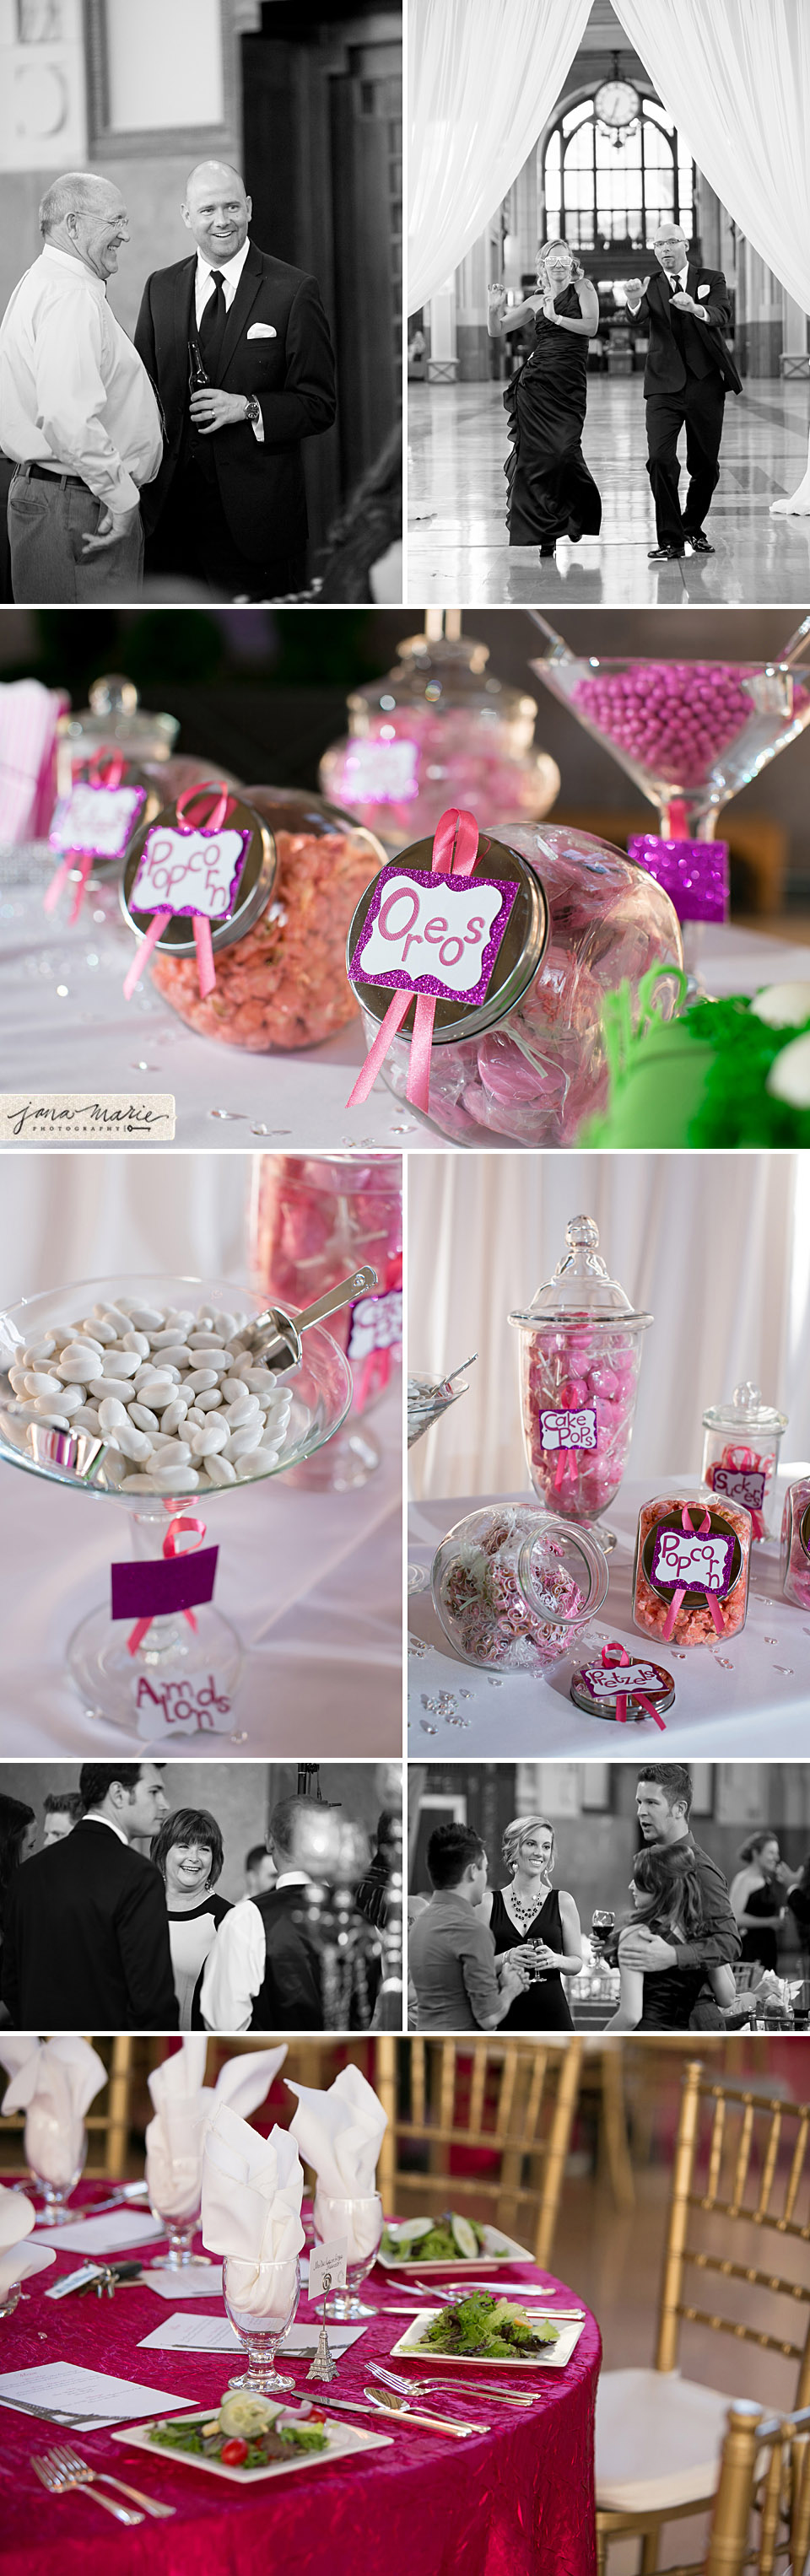 Candy favors, Best Kansas City brides and grooms, bridal party, diy